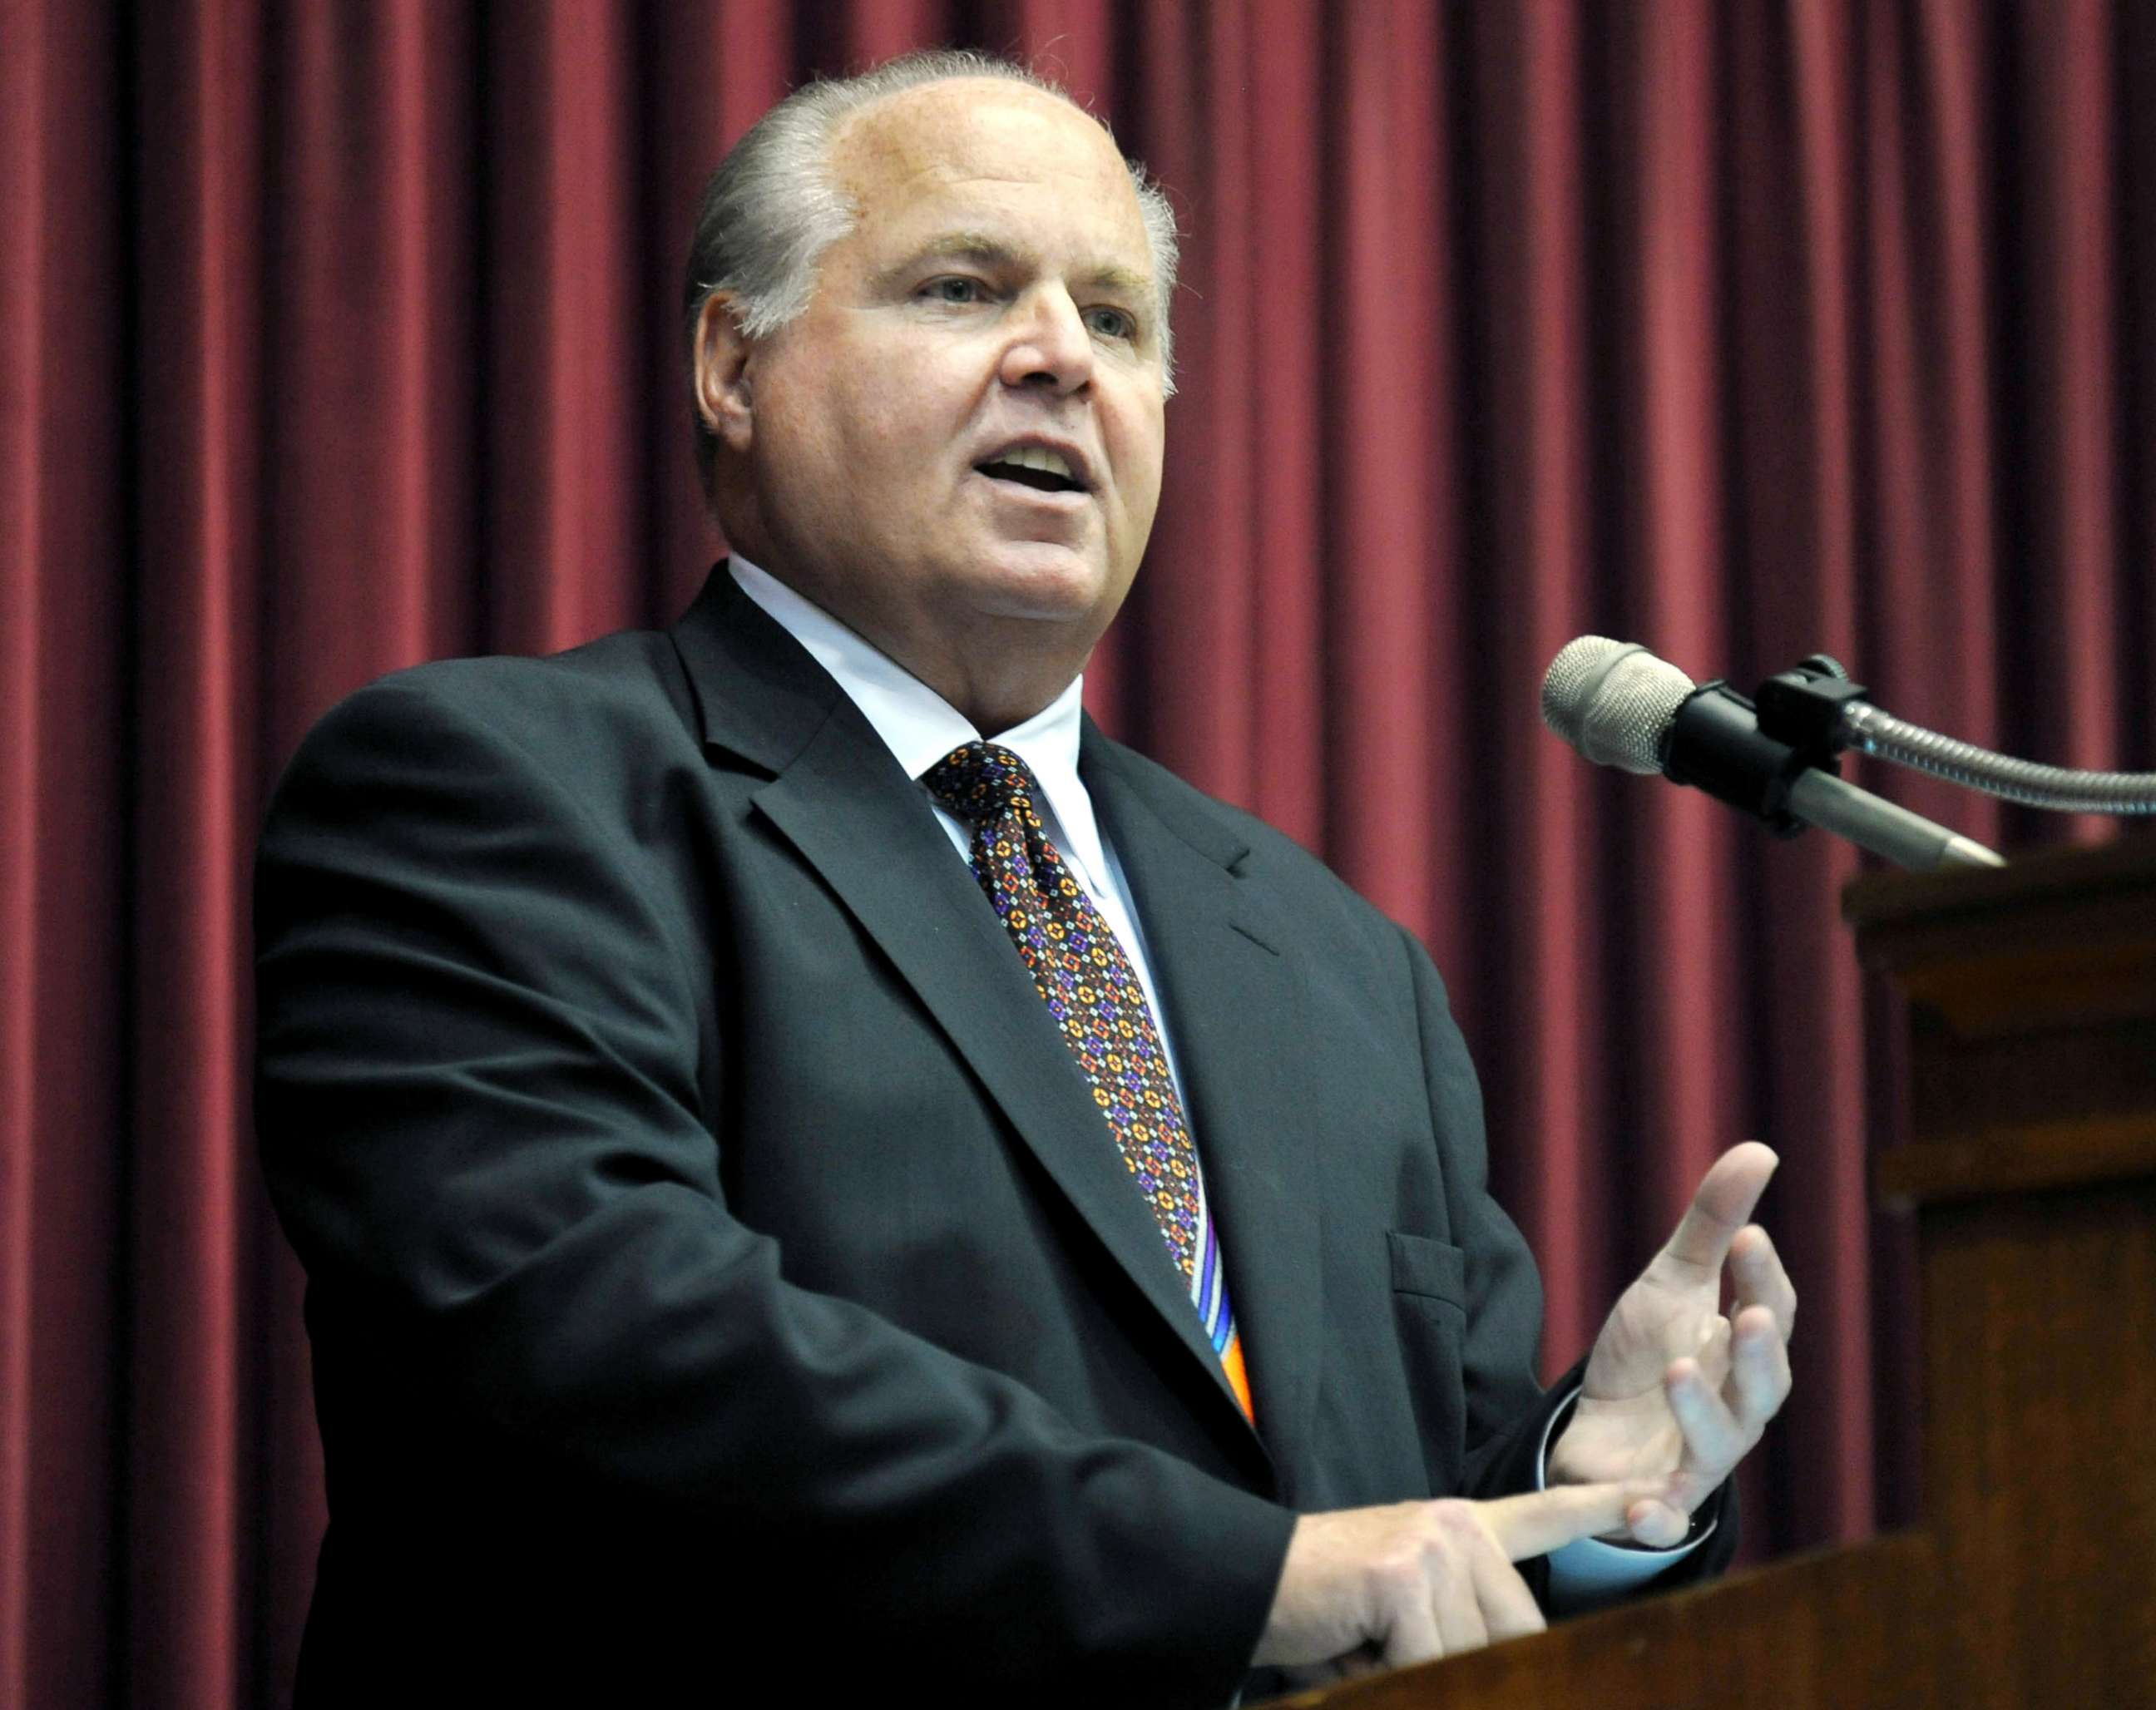 PHOTO: Conservative commentator Rush Limbaugh speaks during a ceremony inducting him into the Hall of Famous Missourians at the state Capitol in Jefferson City, Mo., May 14, 2012.